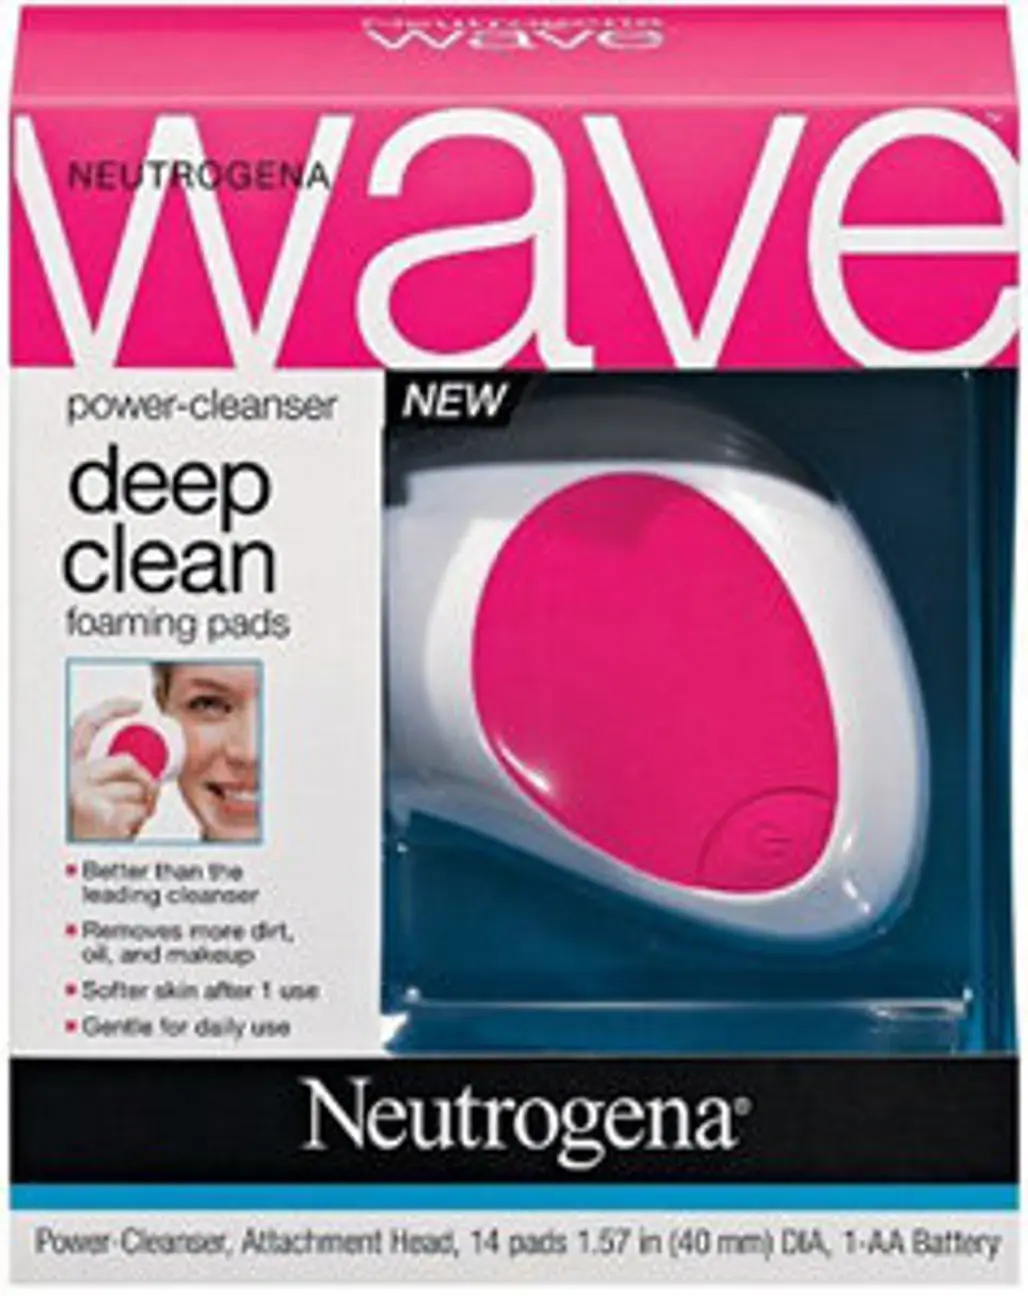 Neutrogena Wave Power-Cleanser and Deep Clean Foaming Pads